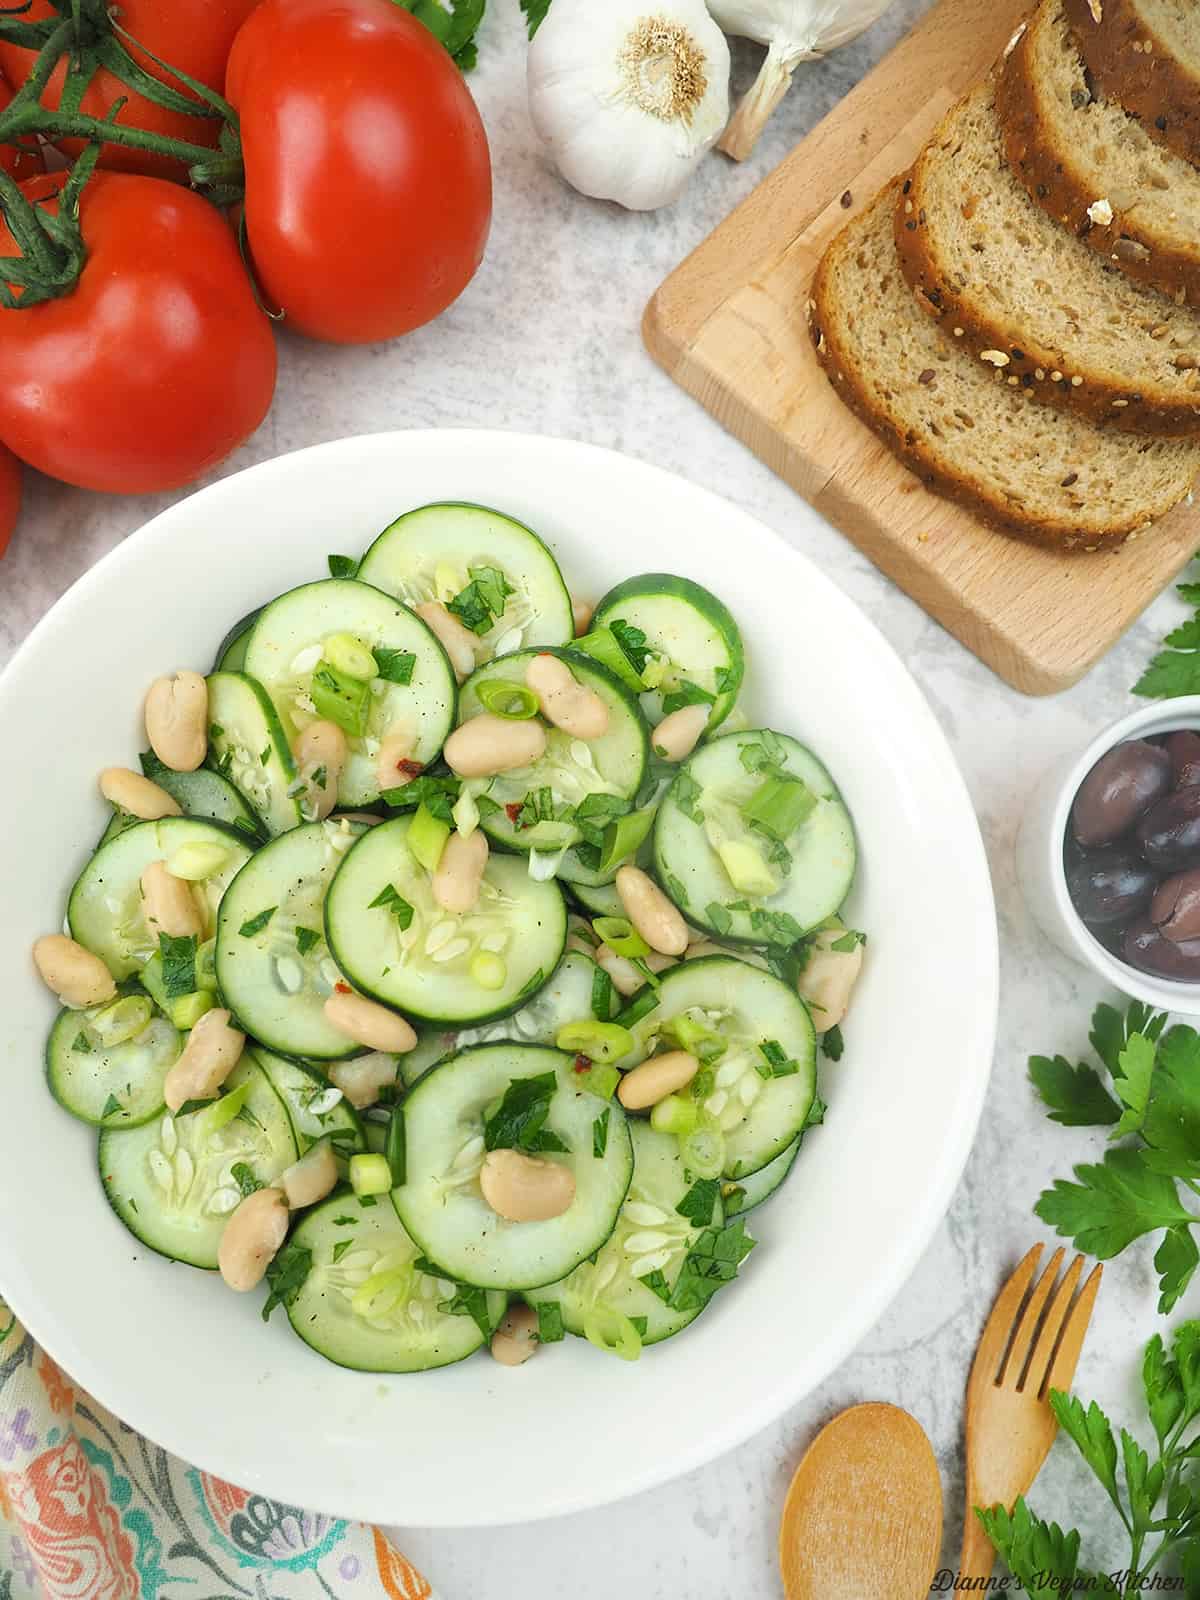 cucumber salad with bread, tomatoes, and olives